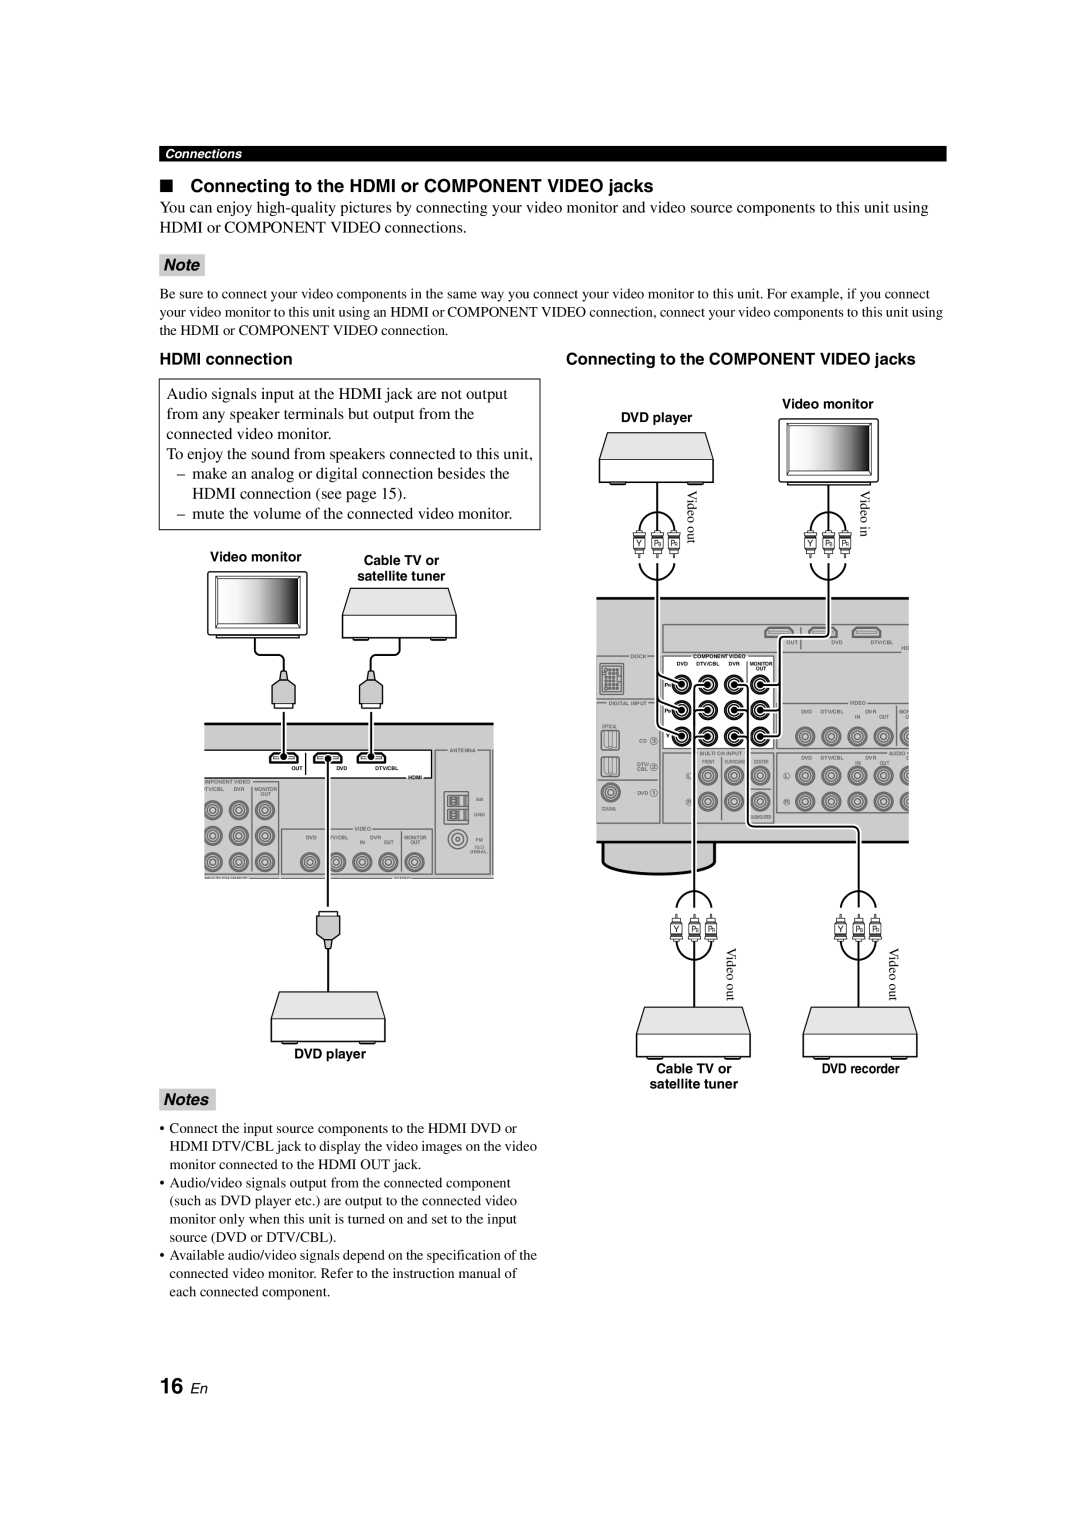 Yamaha HTR-6130 owner manual 16 En, Connecting to the HDMI or COMPONENT VIDEO jacks 